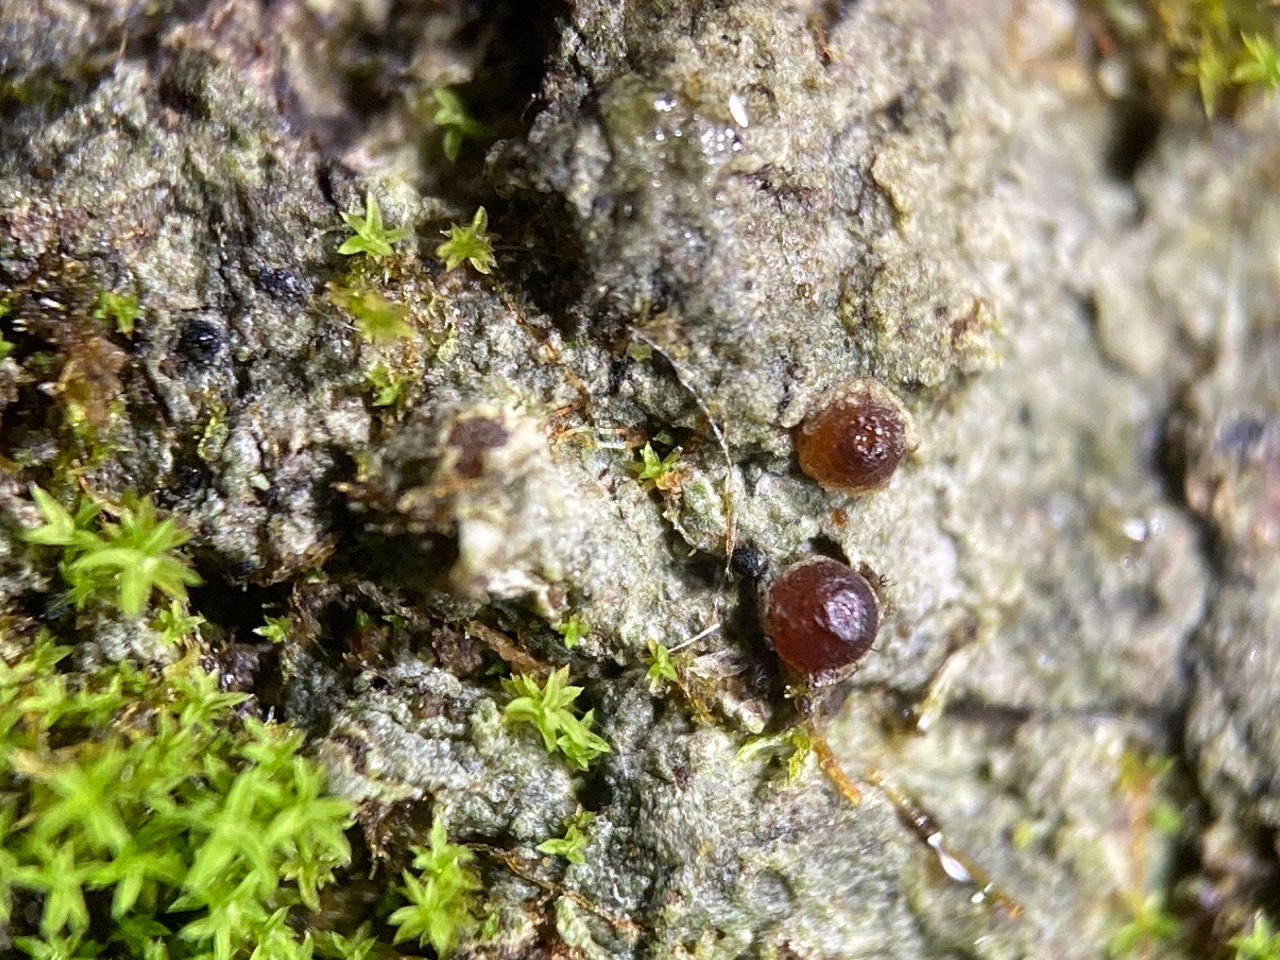 Thelopsis rubella, Denny Inclosure, New Forest